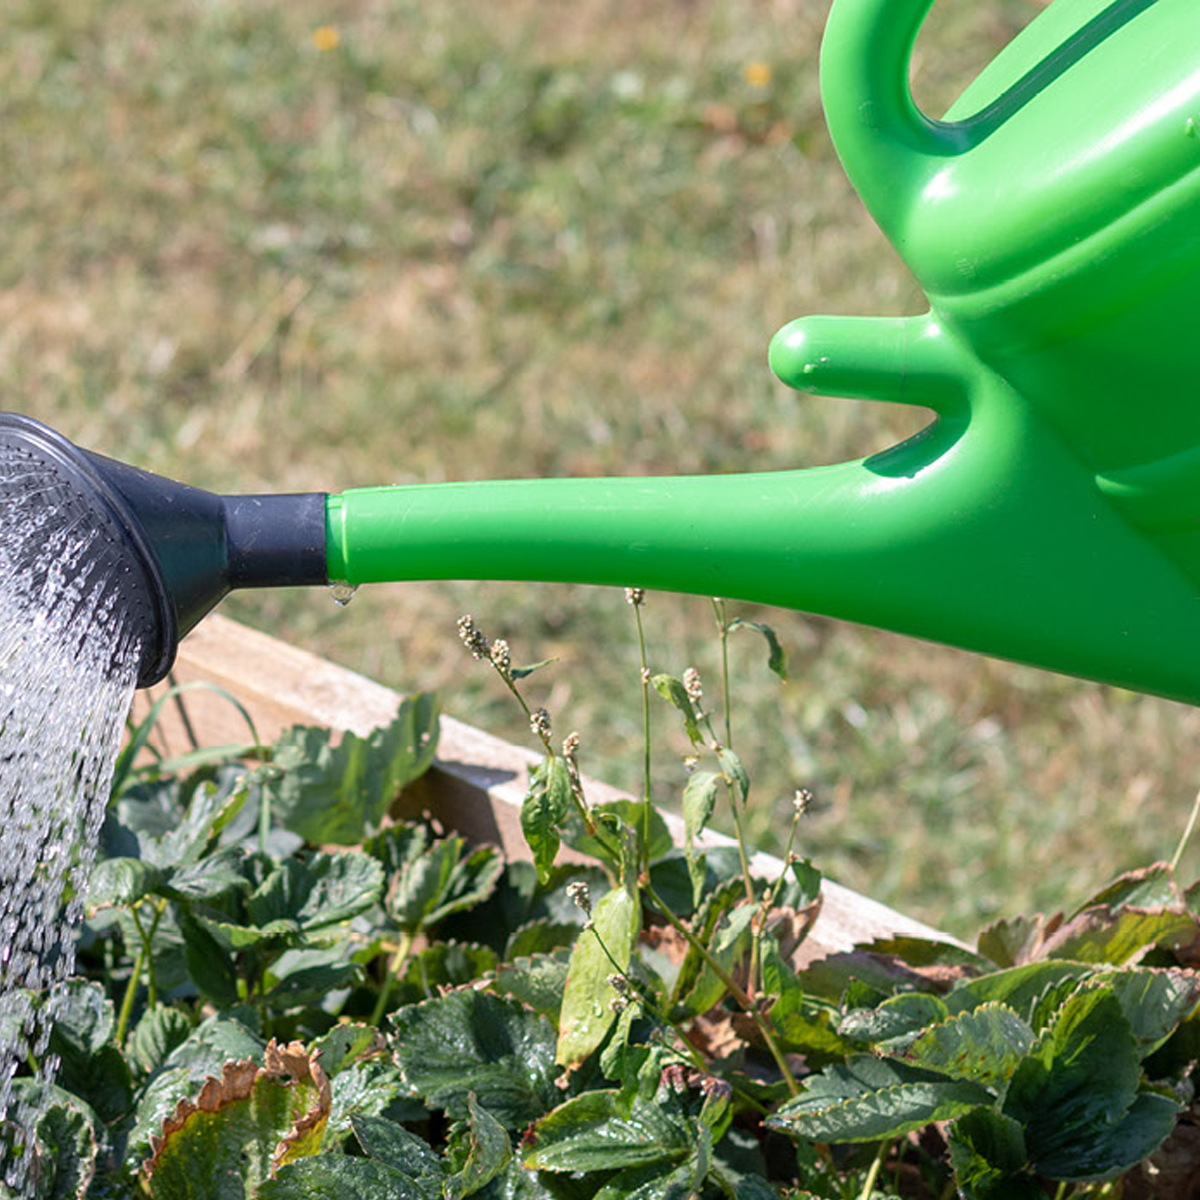 Watering can and plants